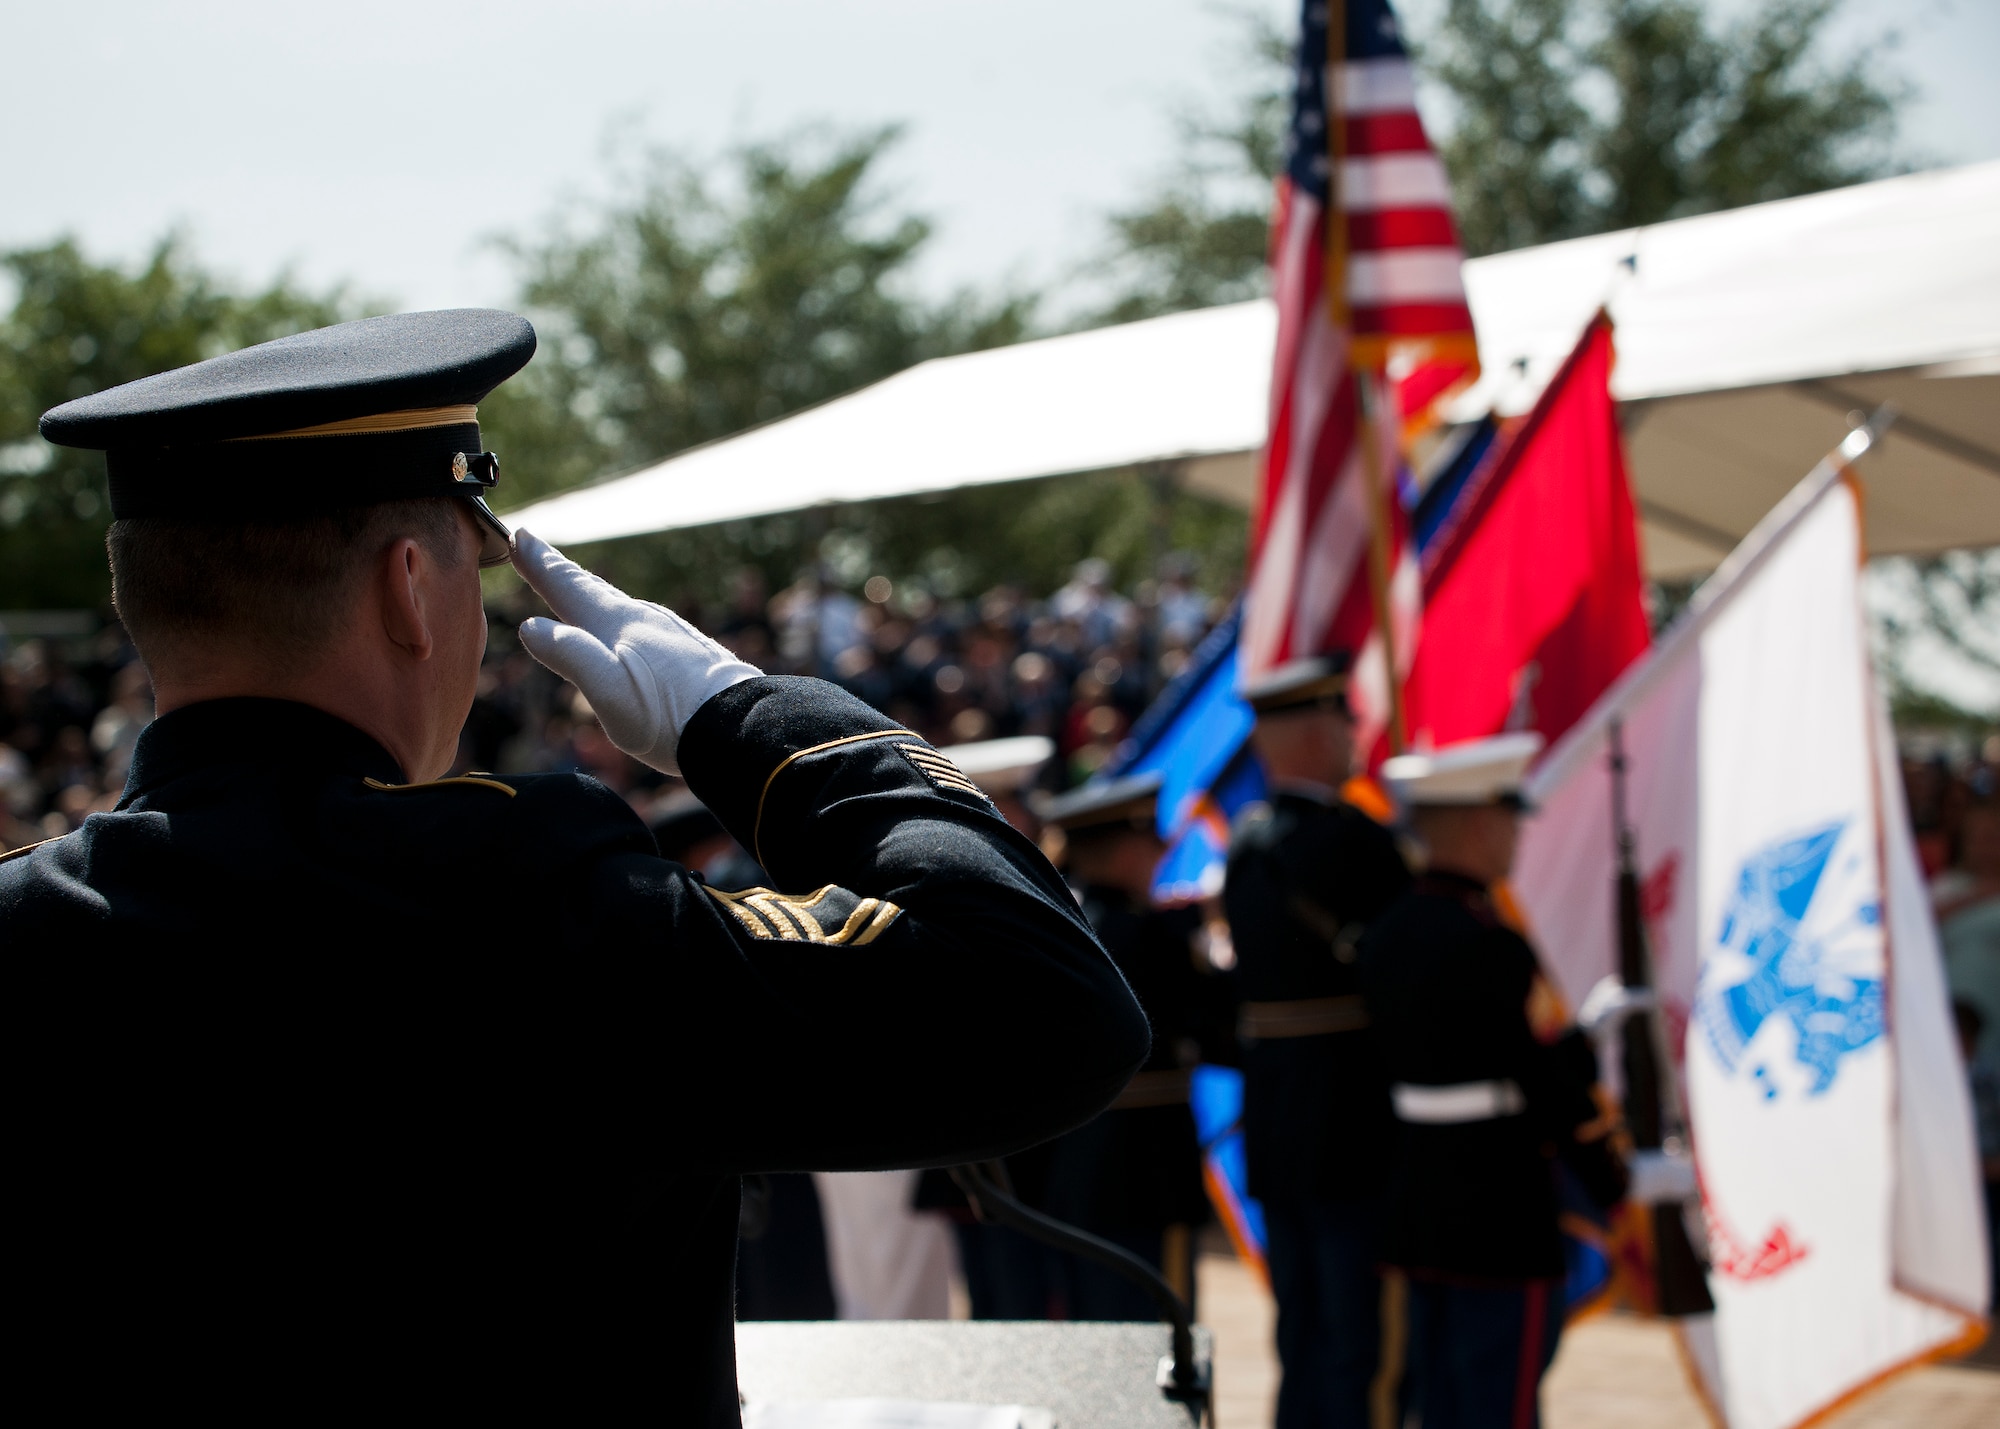 Sgt. 1st Class Joshua Peltz, the master of ceremony for the 45th Annual Explosive Ordnance Disposal Memorial Service, salutes during the presentation of the colors May 3, at Eglin Air Force Base, Fla. Eight new names of Army and Marine EOD technicians, who lost their lives, were added to the Memorial Wall this year.  The all-service total now stands at 306. (U.S. Air Force photo/Tech. Sgt. Sam King)